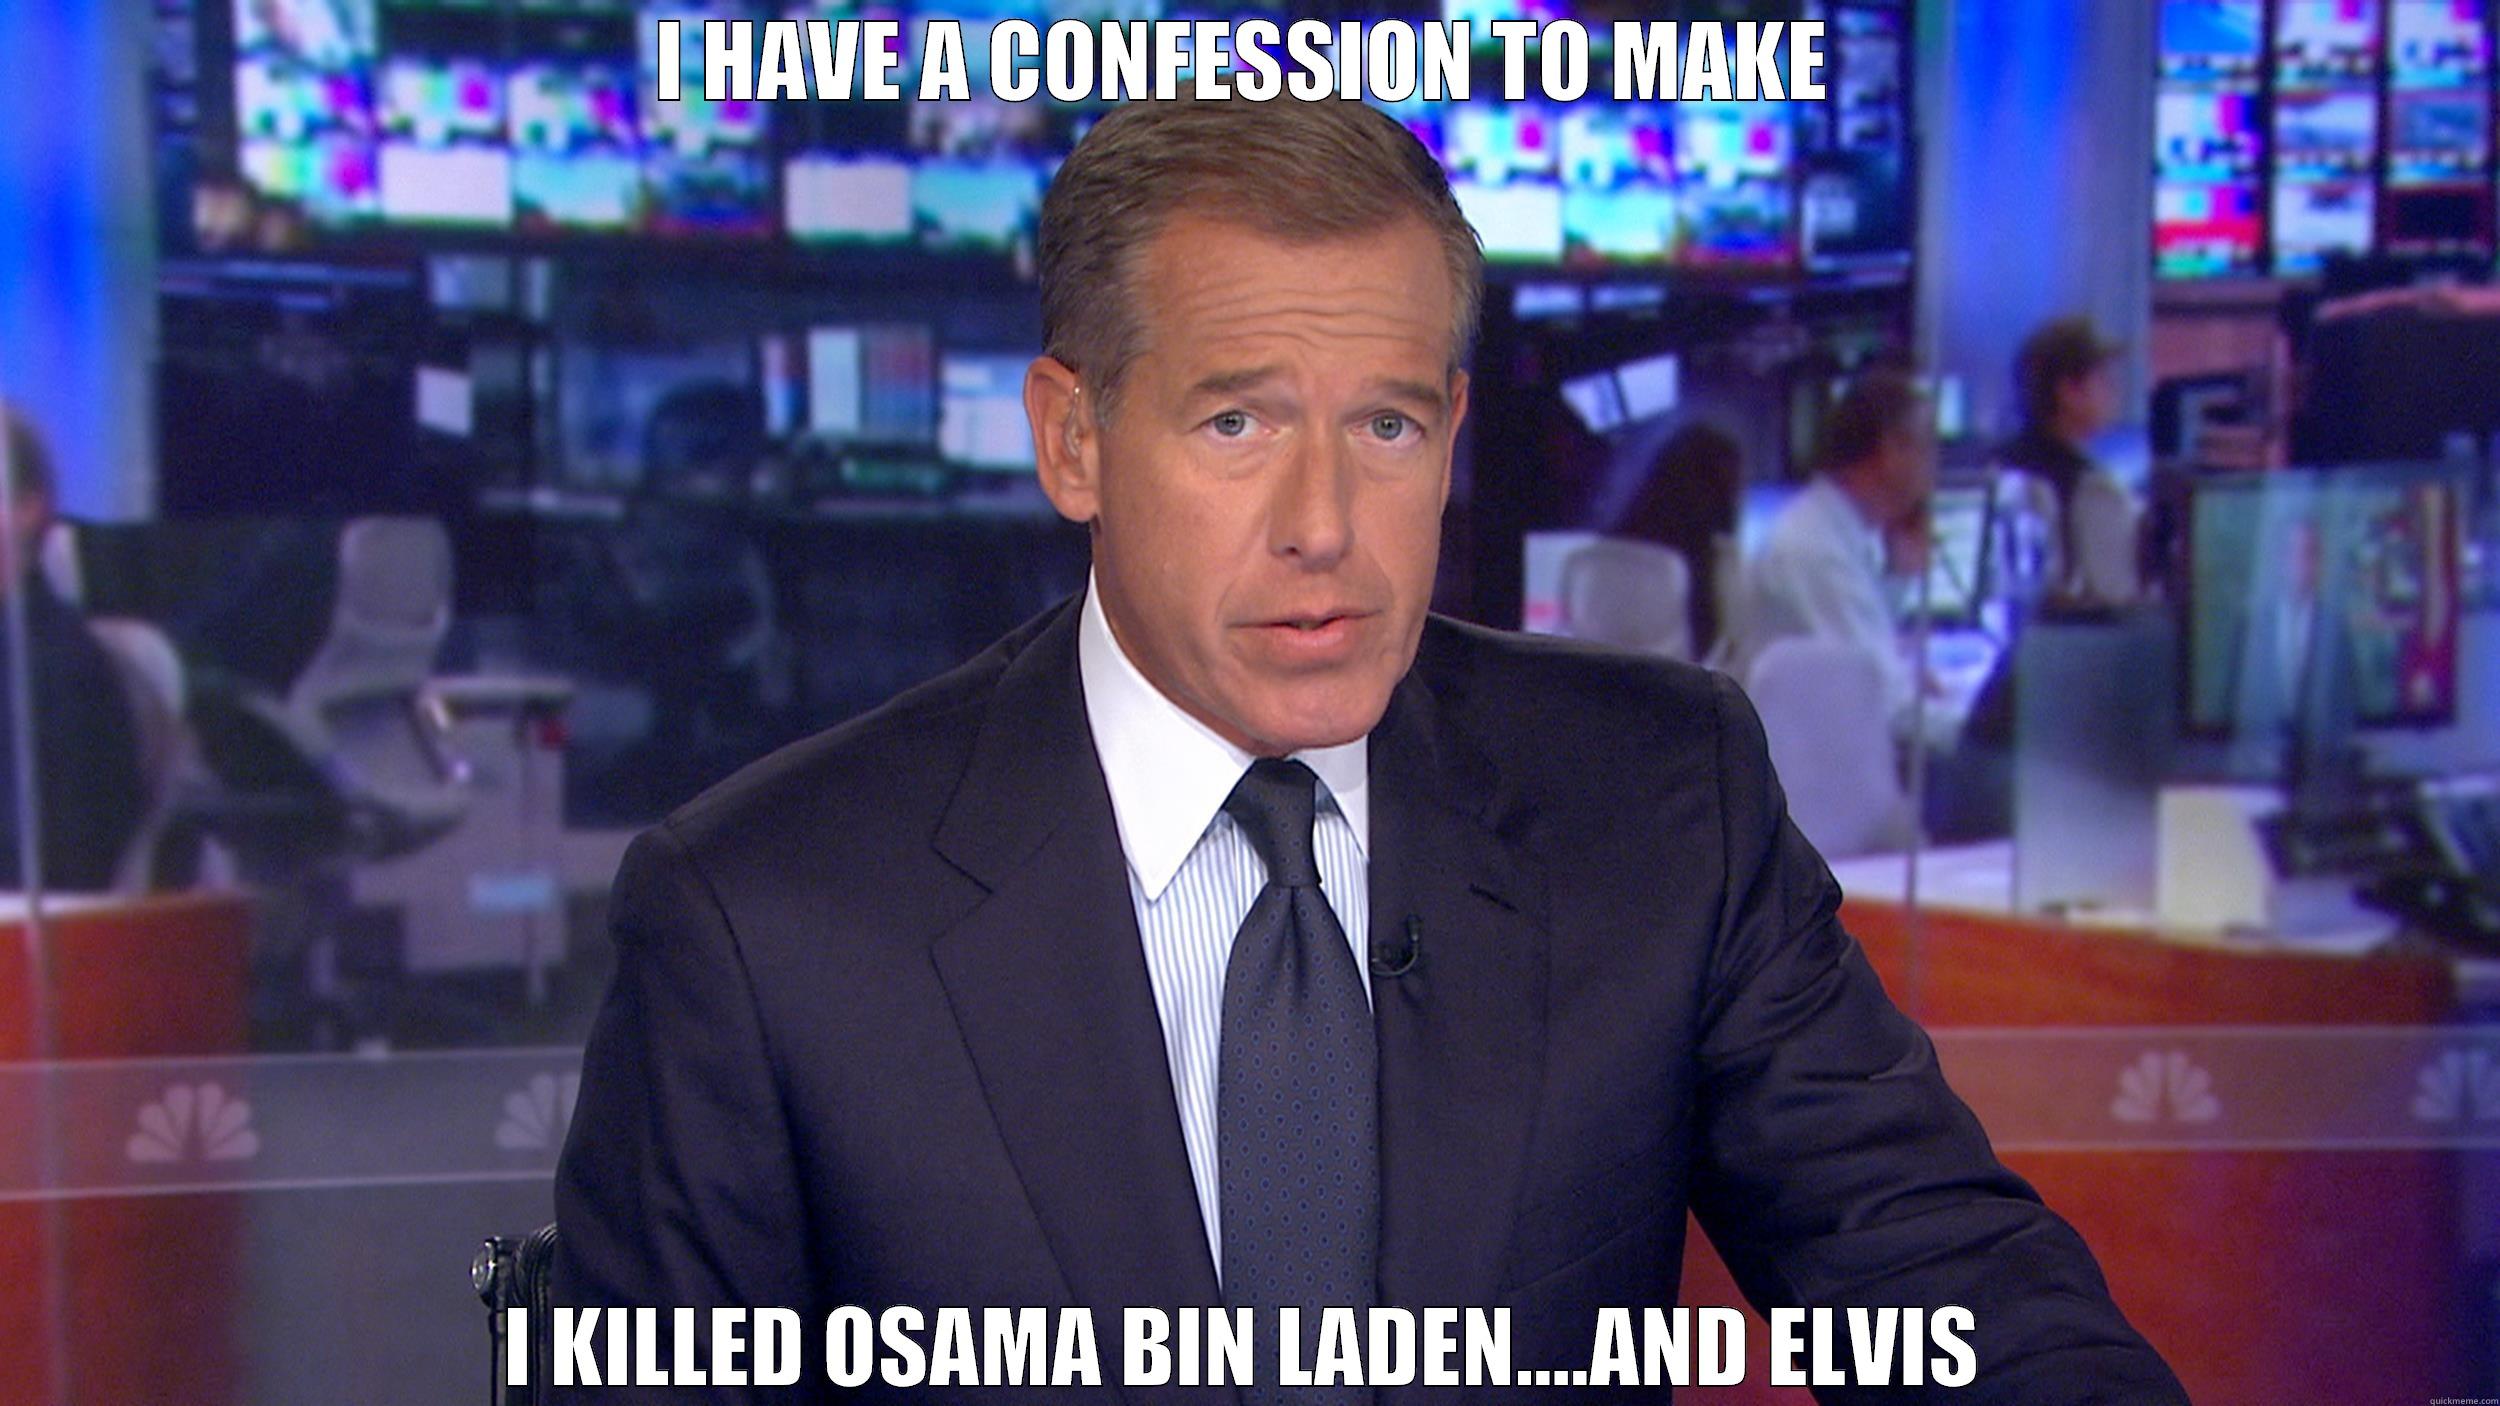 Brian Williams confession - I HAVE A CONFESSION TO MAKE I KILLED OSAMA BIN LADEN....AND ELVIS Misc